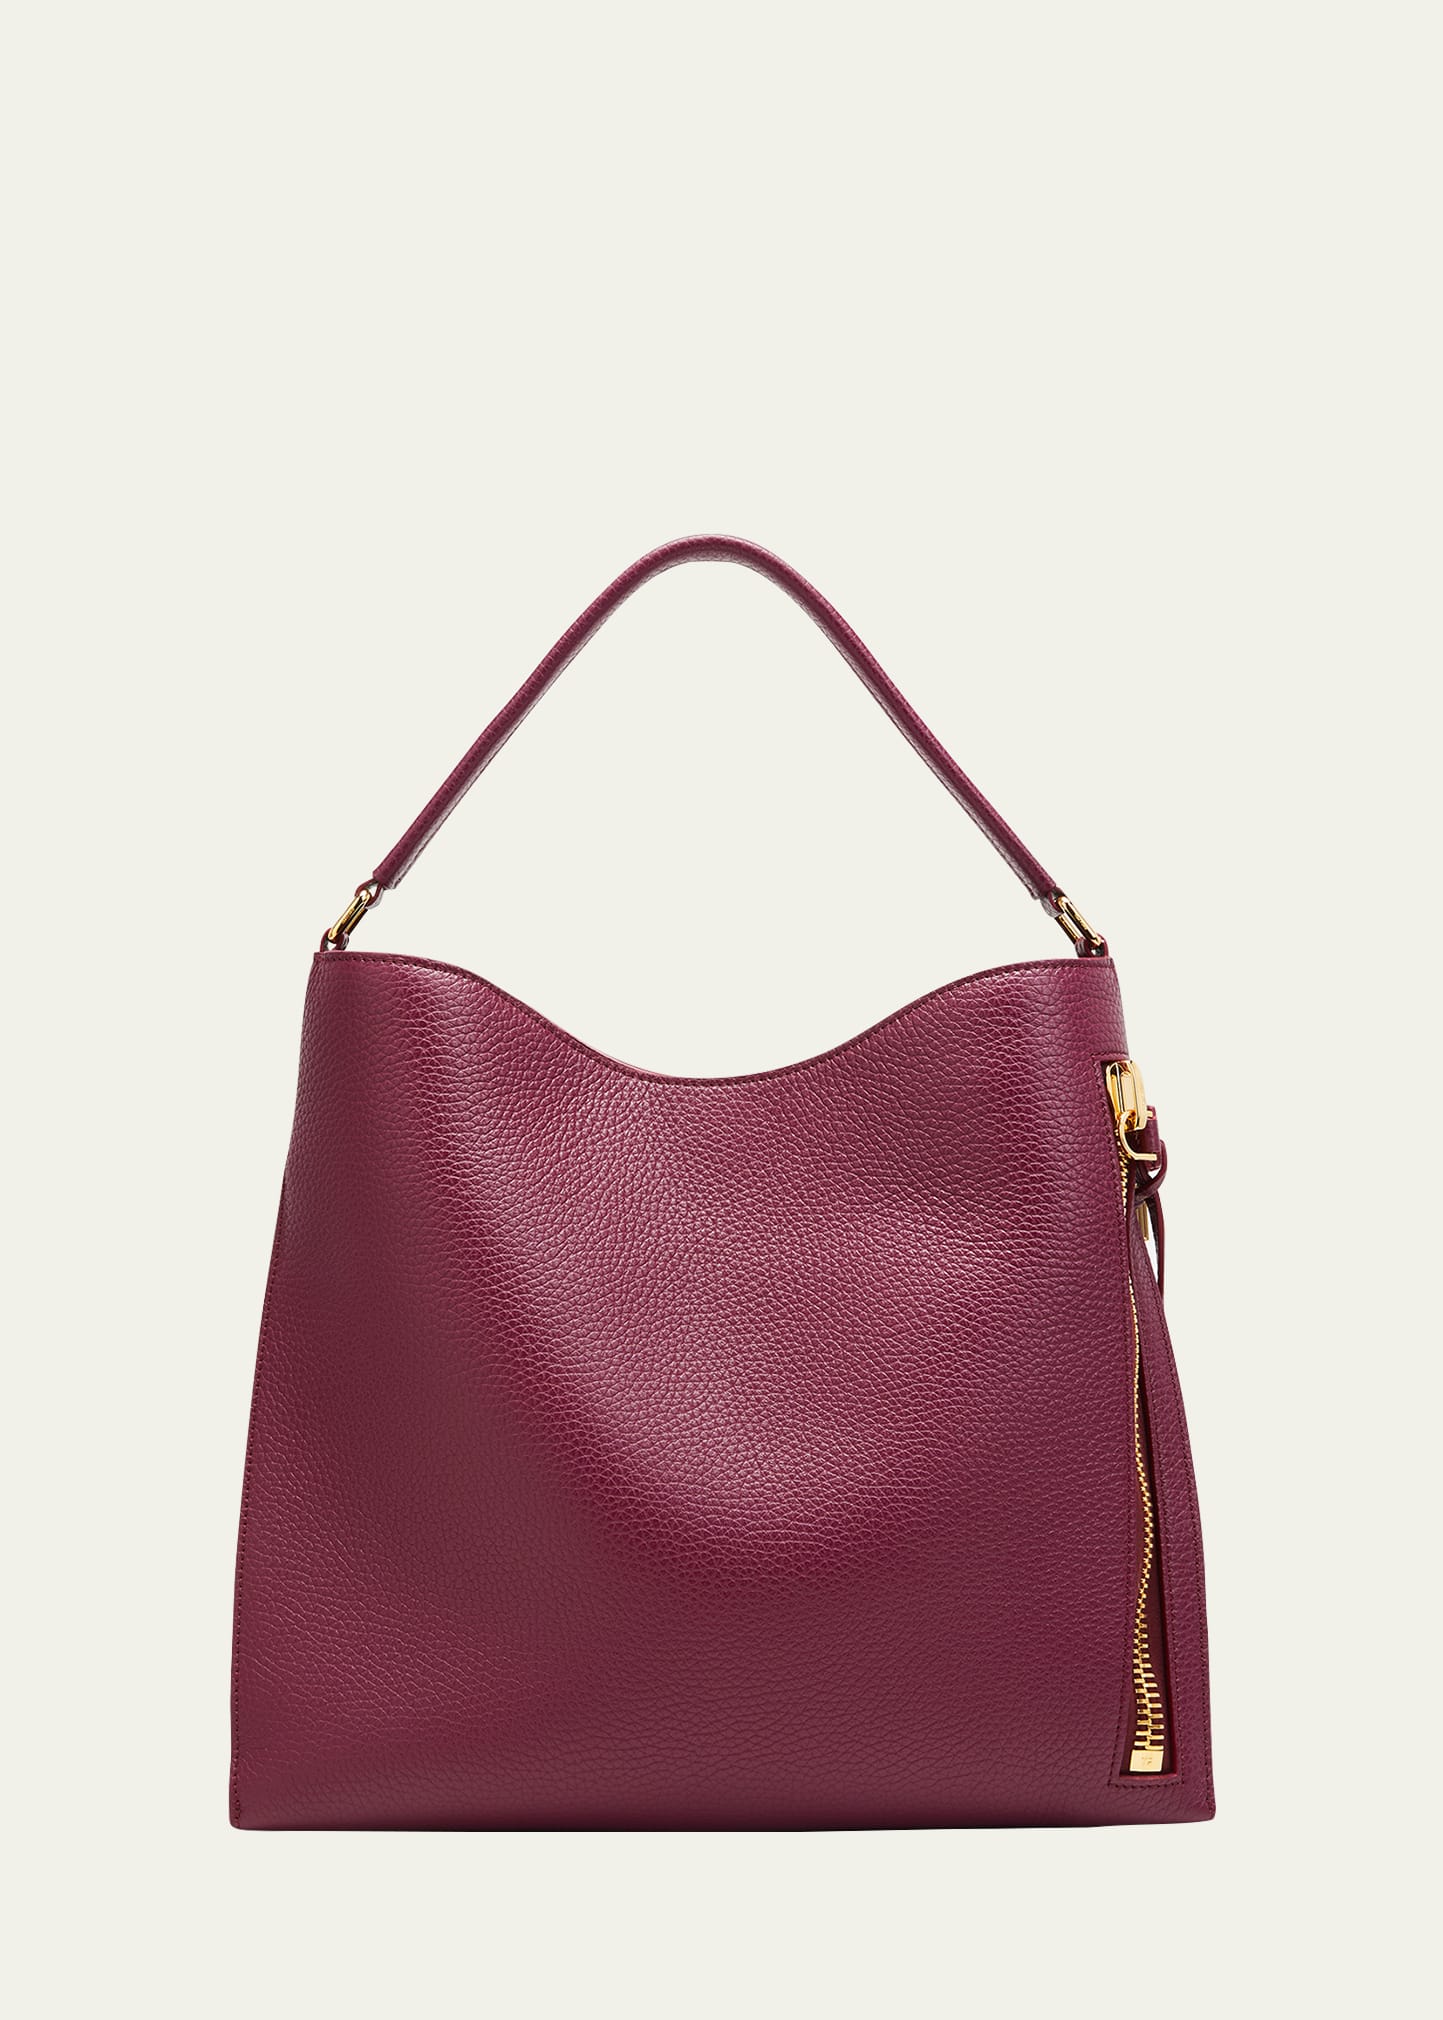 Tom Ford Alix Small Calfskin Hobo Bag In Cranberry